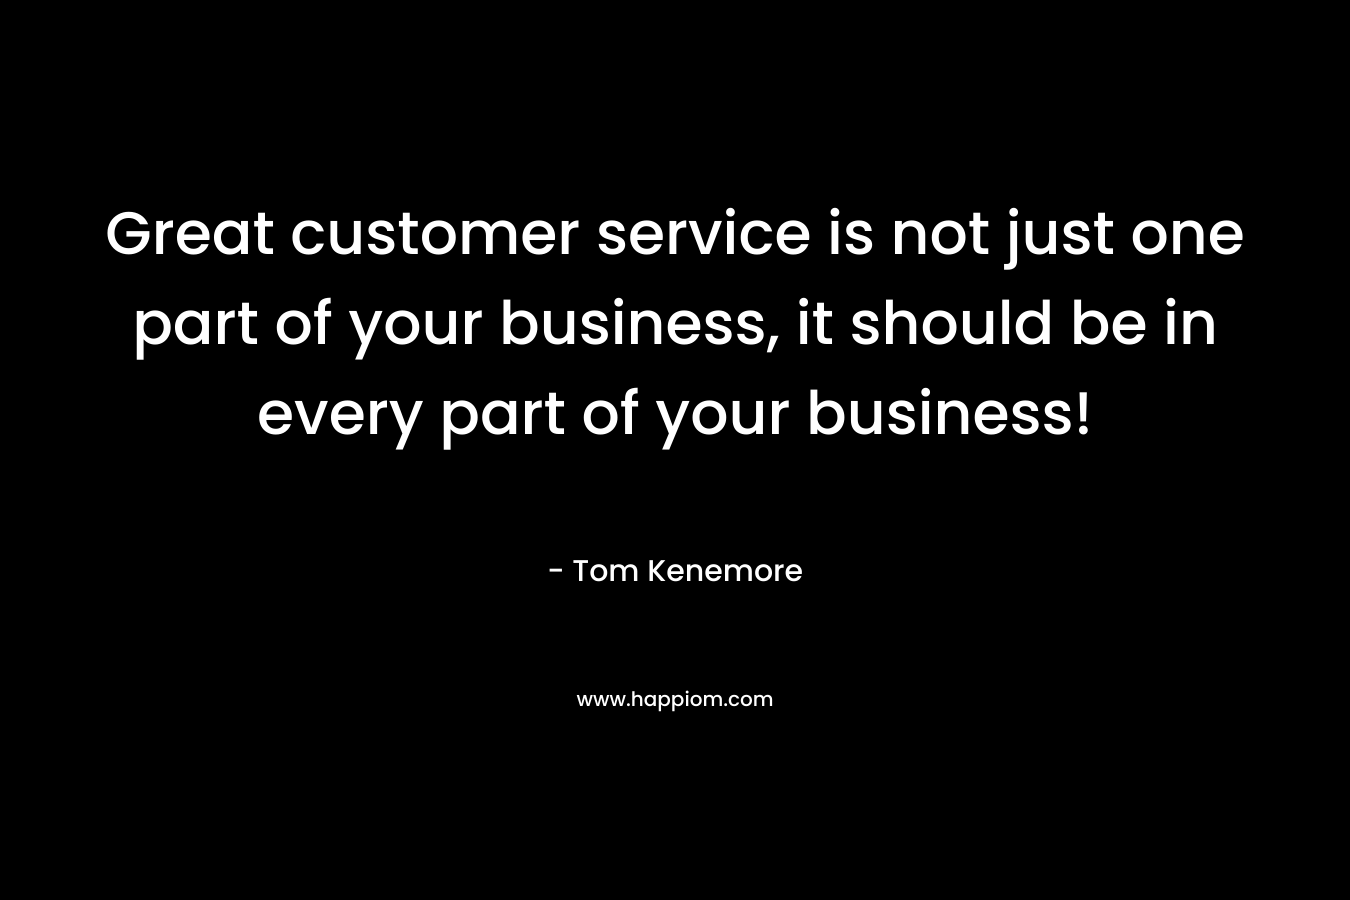 Great customer service is not just one part of your business, it should be in every part of your business!